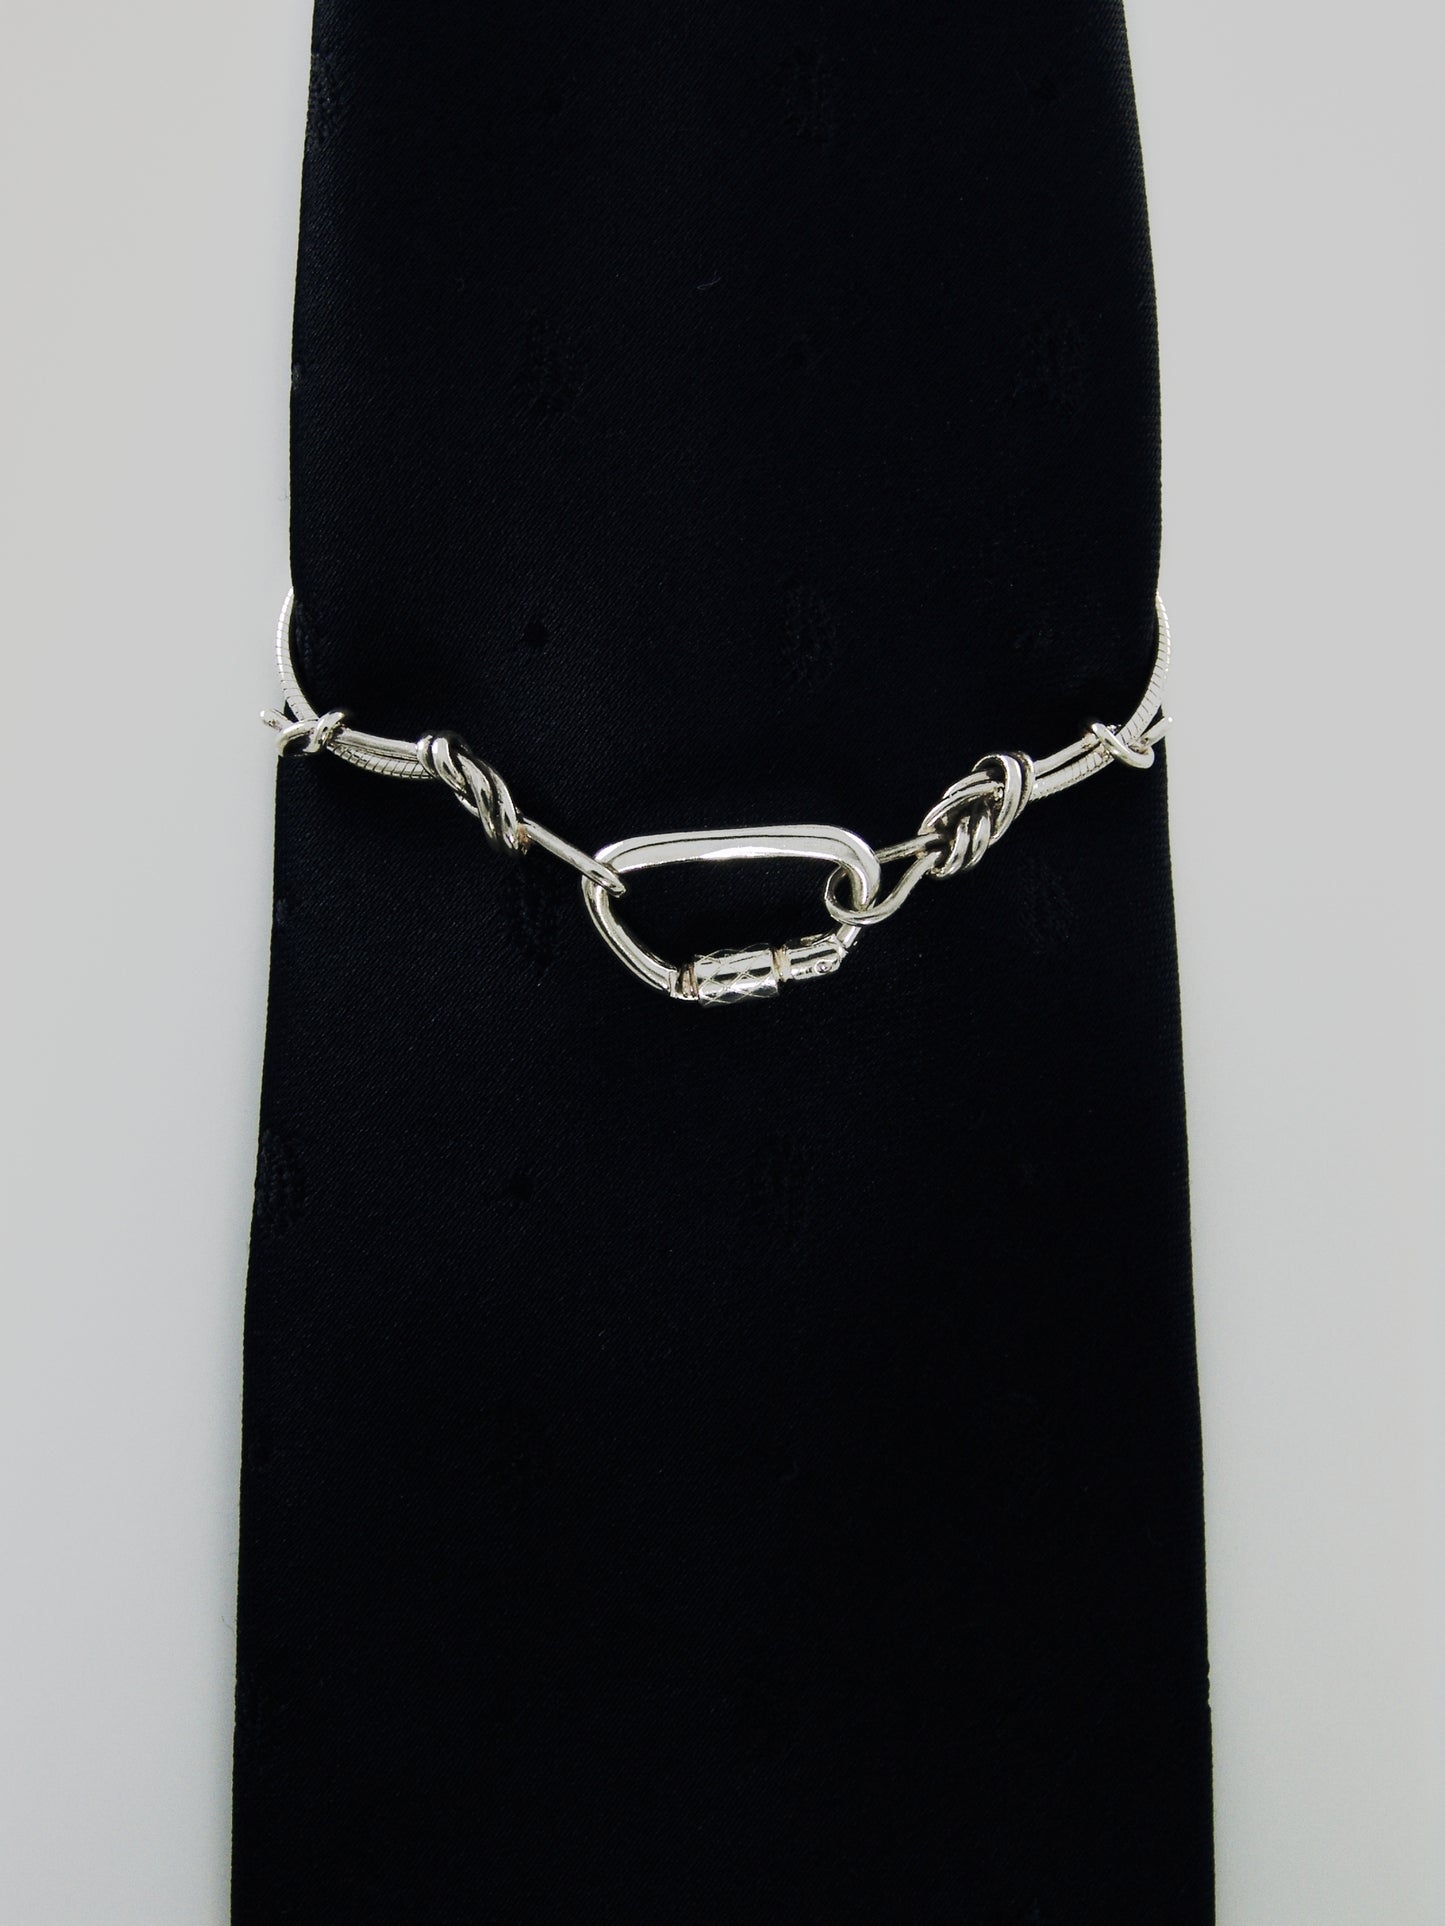 climbing rope chain tie tack with functional carabiner in sterling silver - Modled